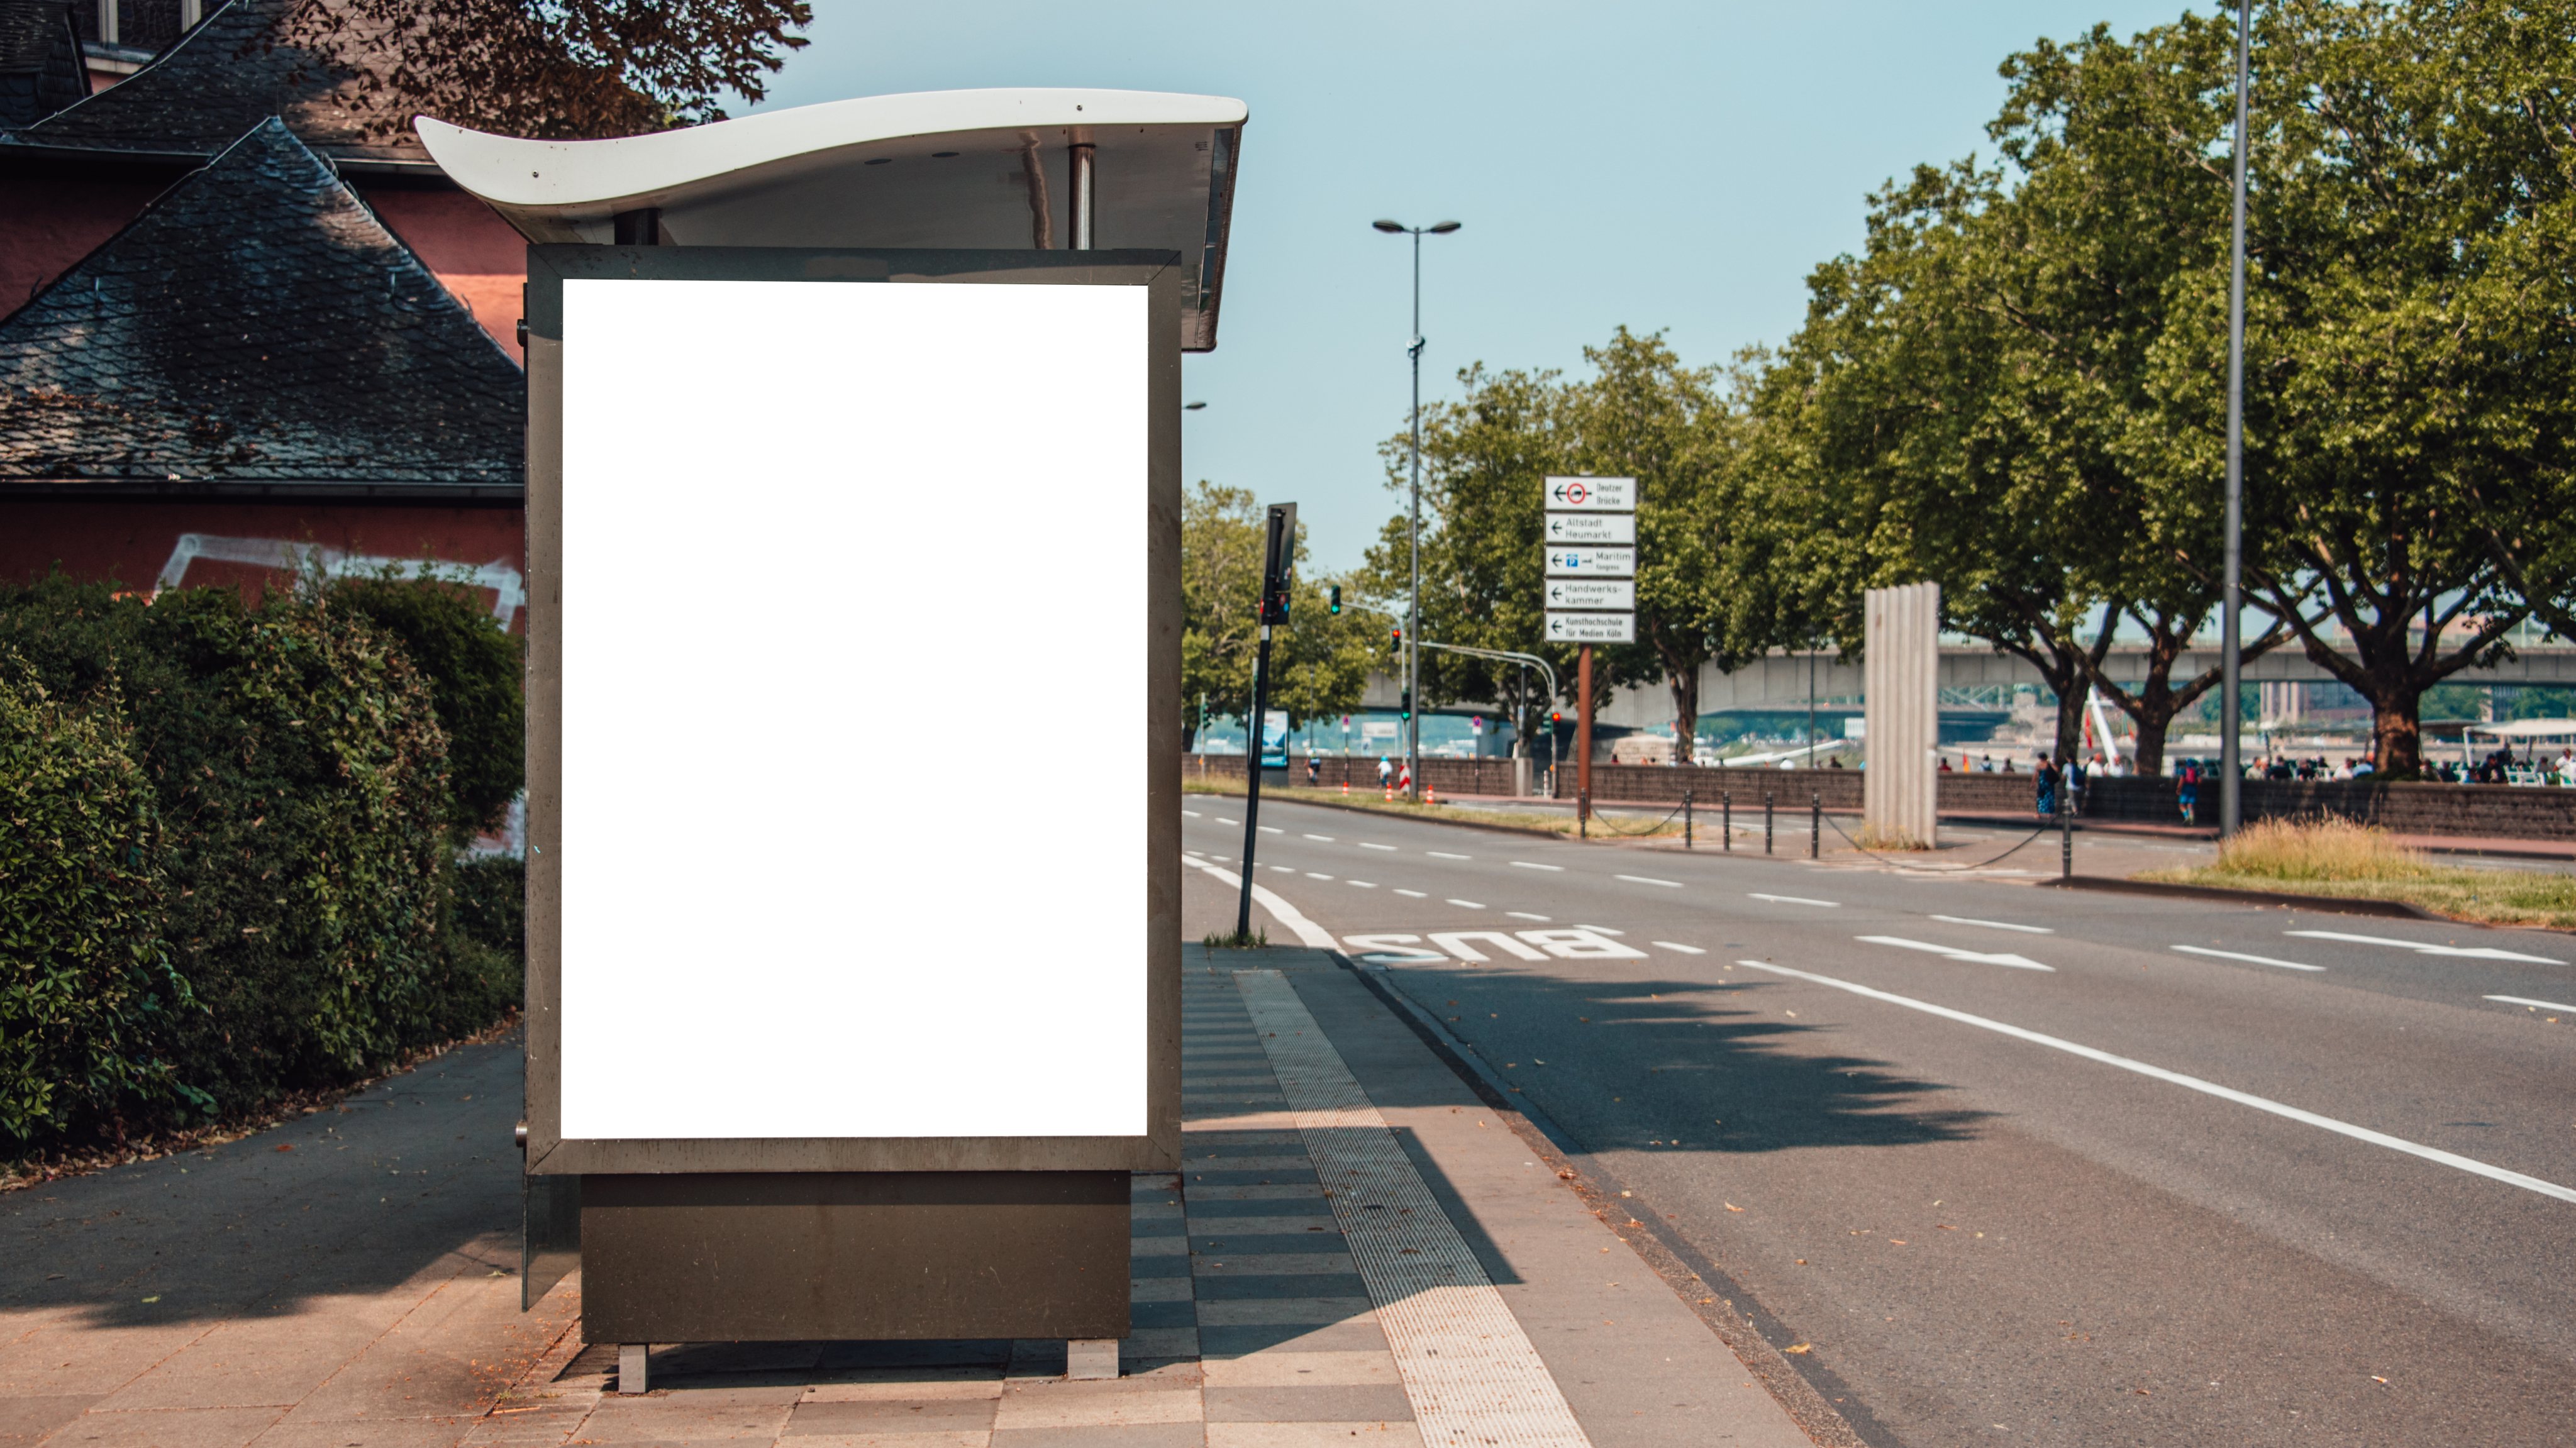 Bus stop with billboard